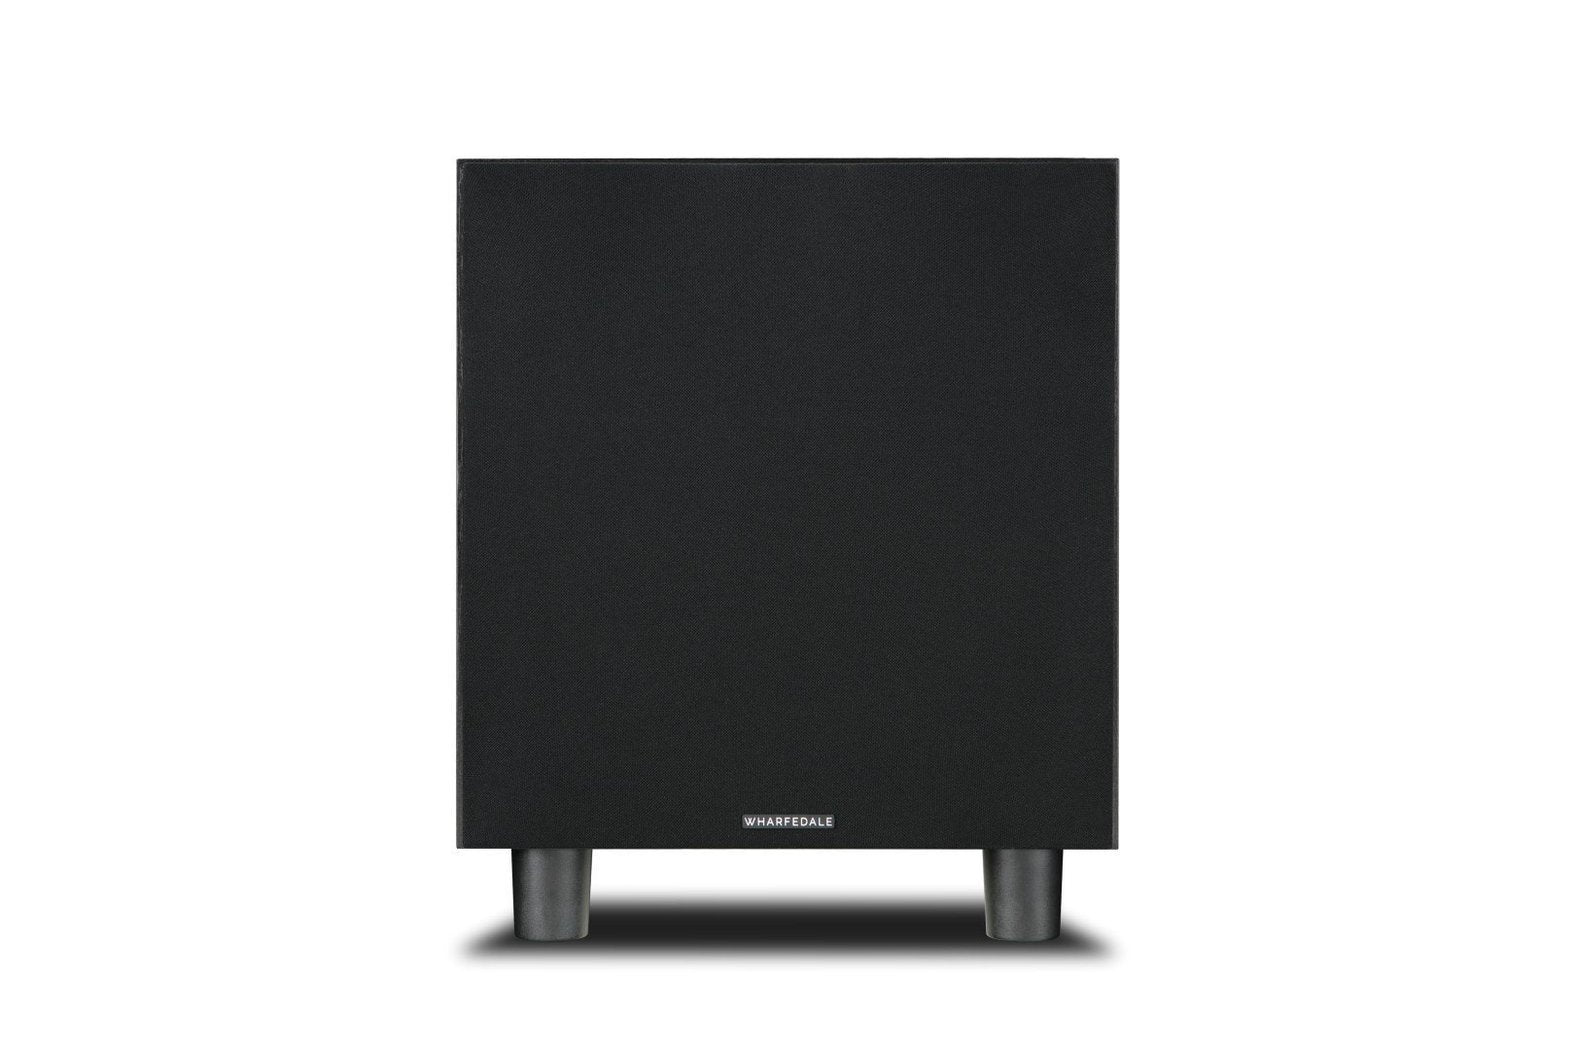 Wharfedale SW-10 active subwoofer